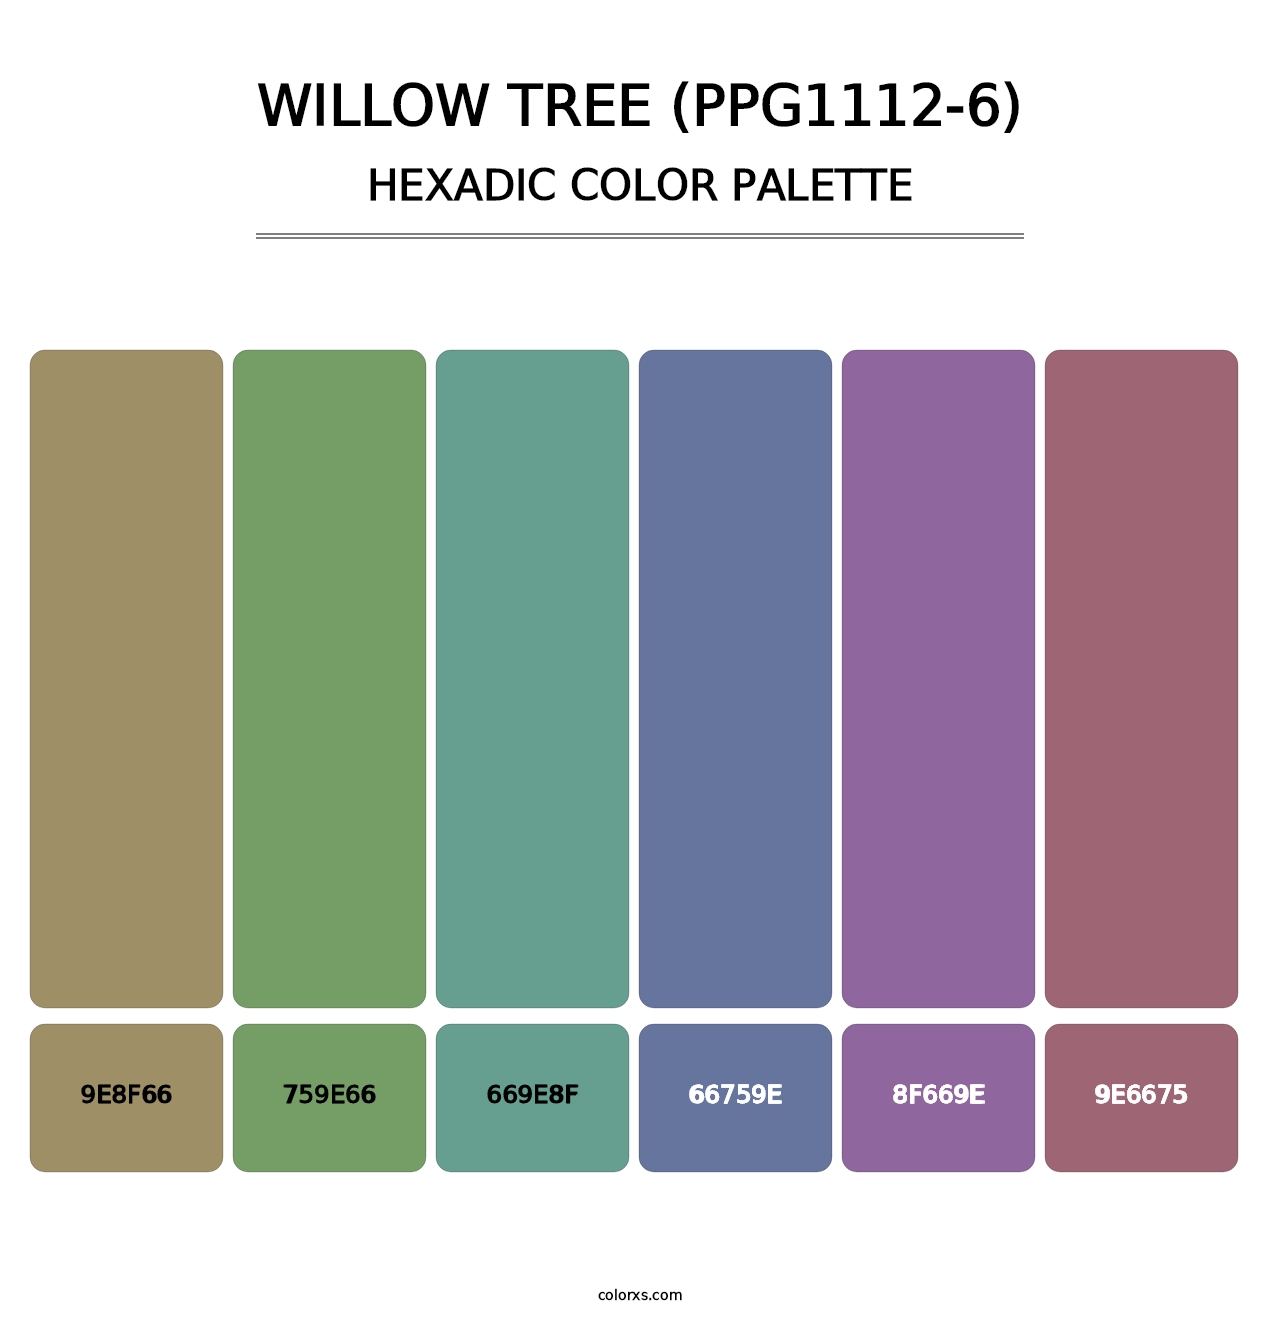 Willow Tree (PPG1112-6) - Hexadic Color Palette